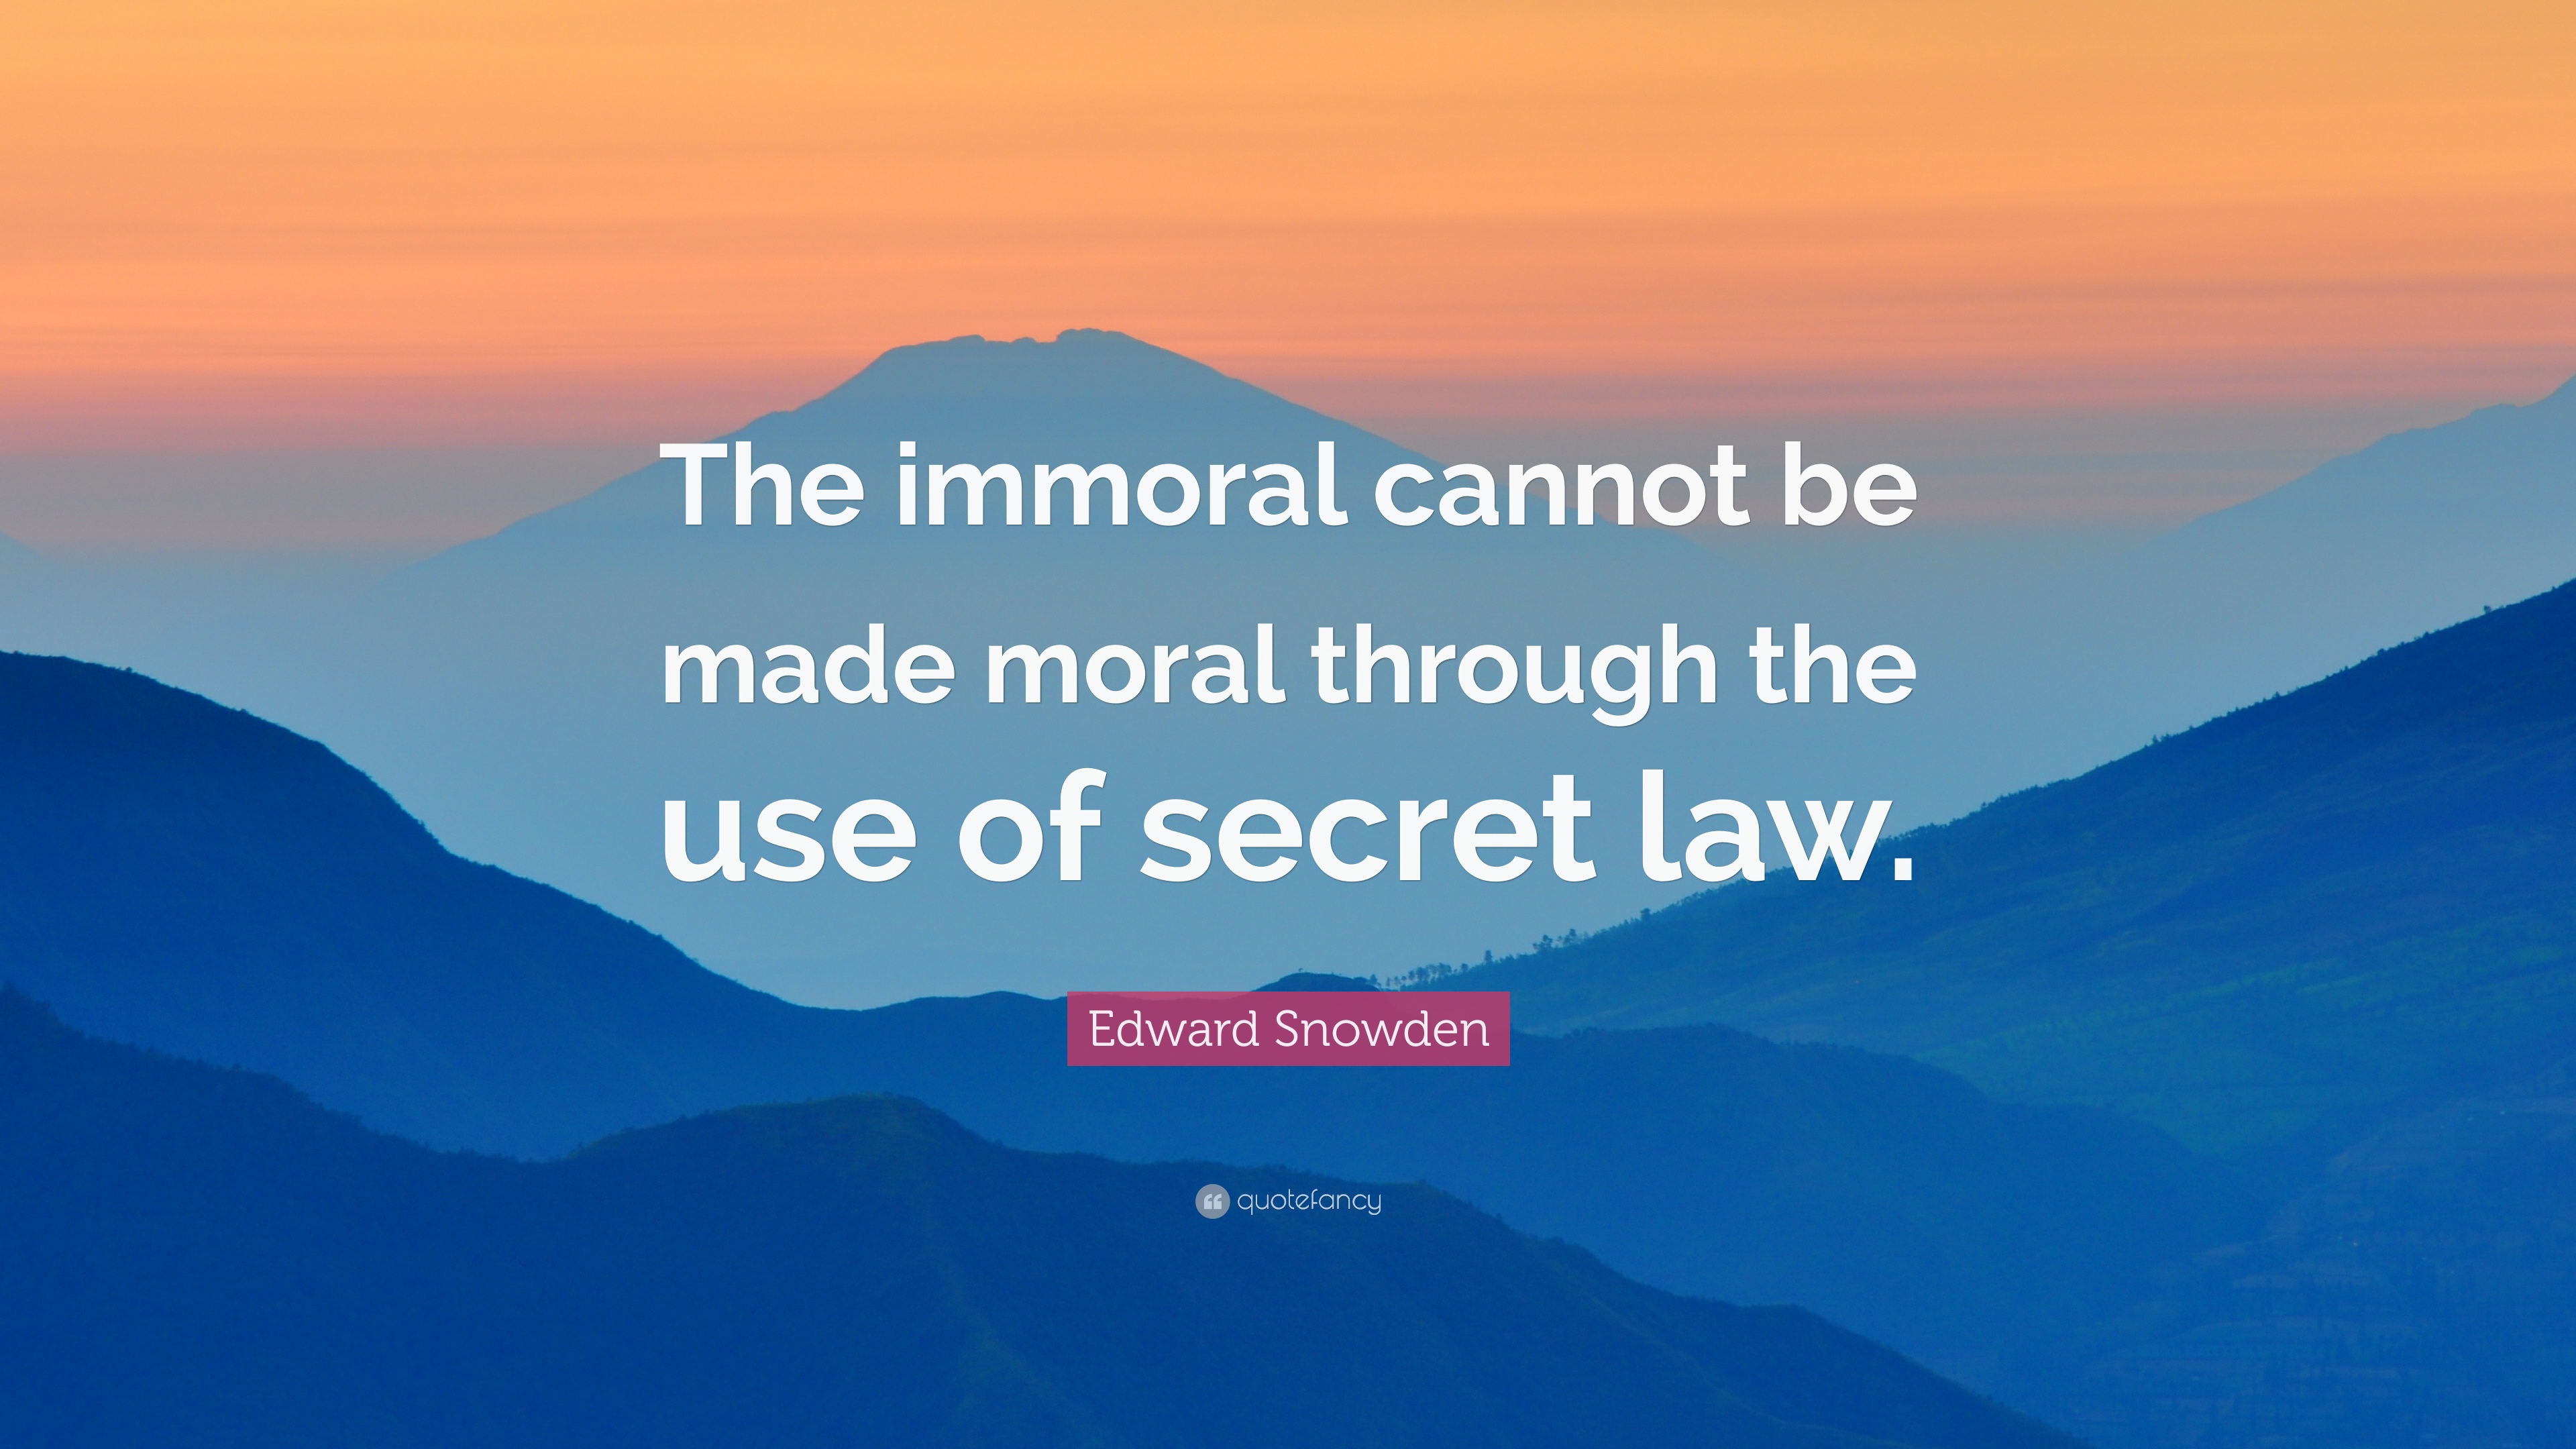 Edward Snowden Quote: “The immoral cannot be made moral through